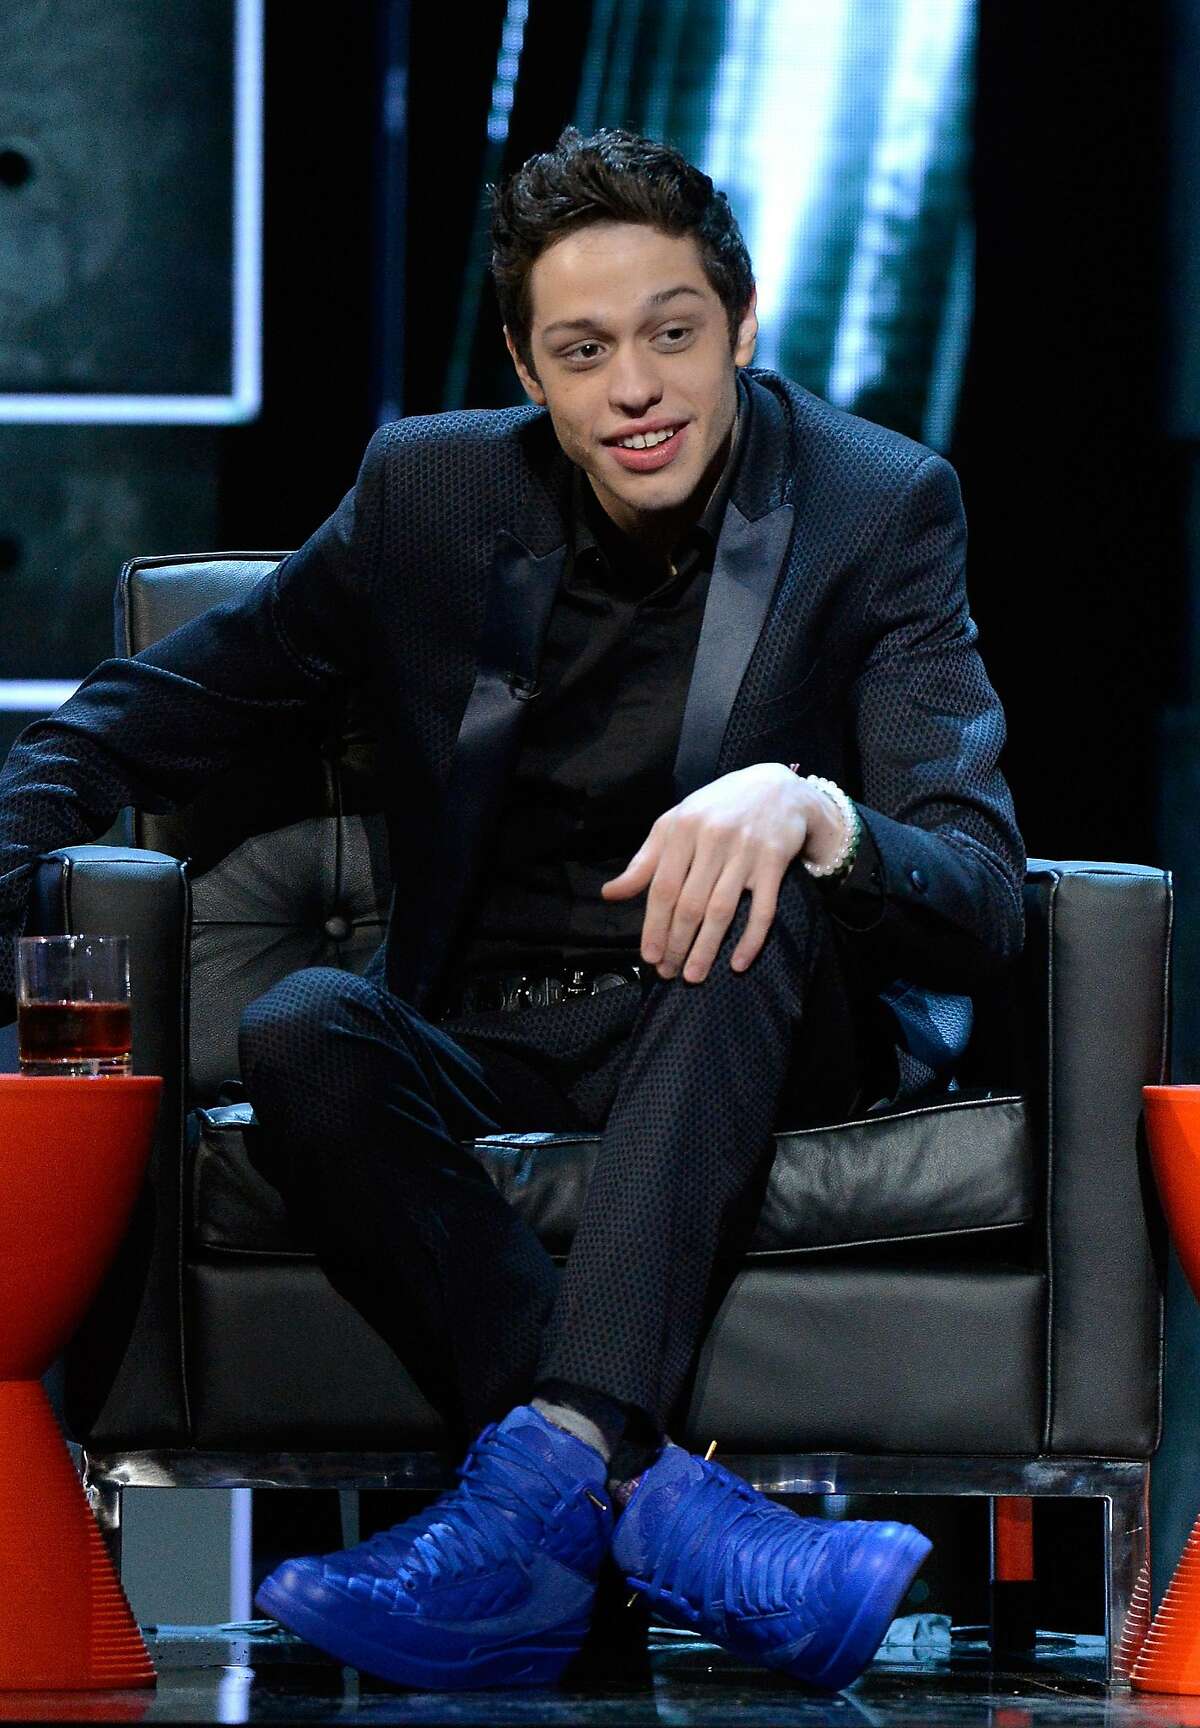 Pete Davidson of "Saturday Night Live" at Comedy Central's Justin Bieber roast.